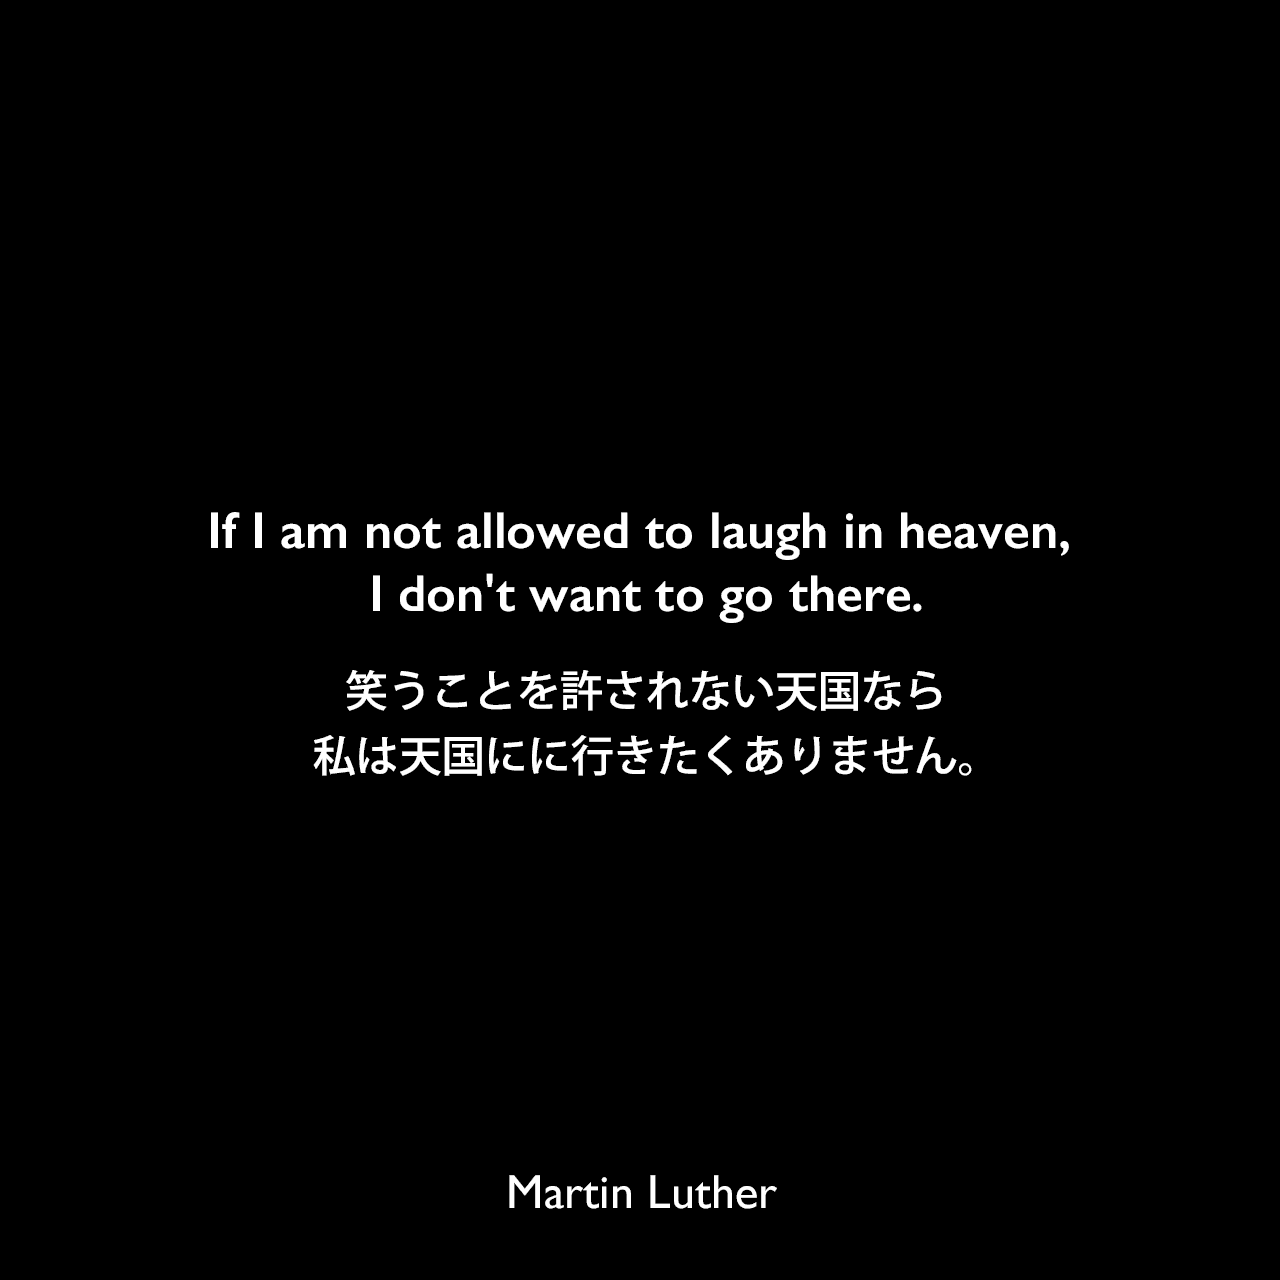 If I am not allowed to laugh in heaven, I don't want to go there.笑うことを許されない天国なら、私は天国にに行きたくありません。Martin Luther